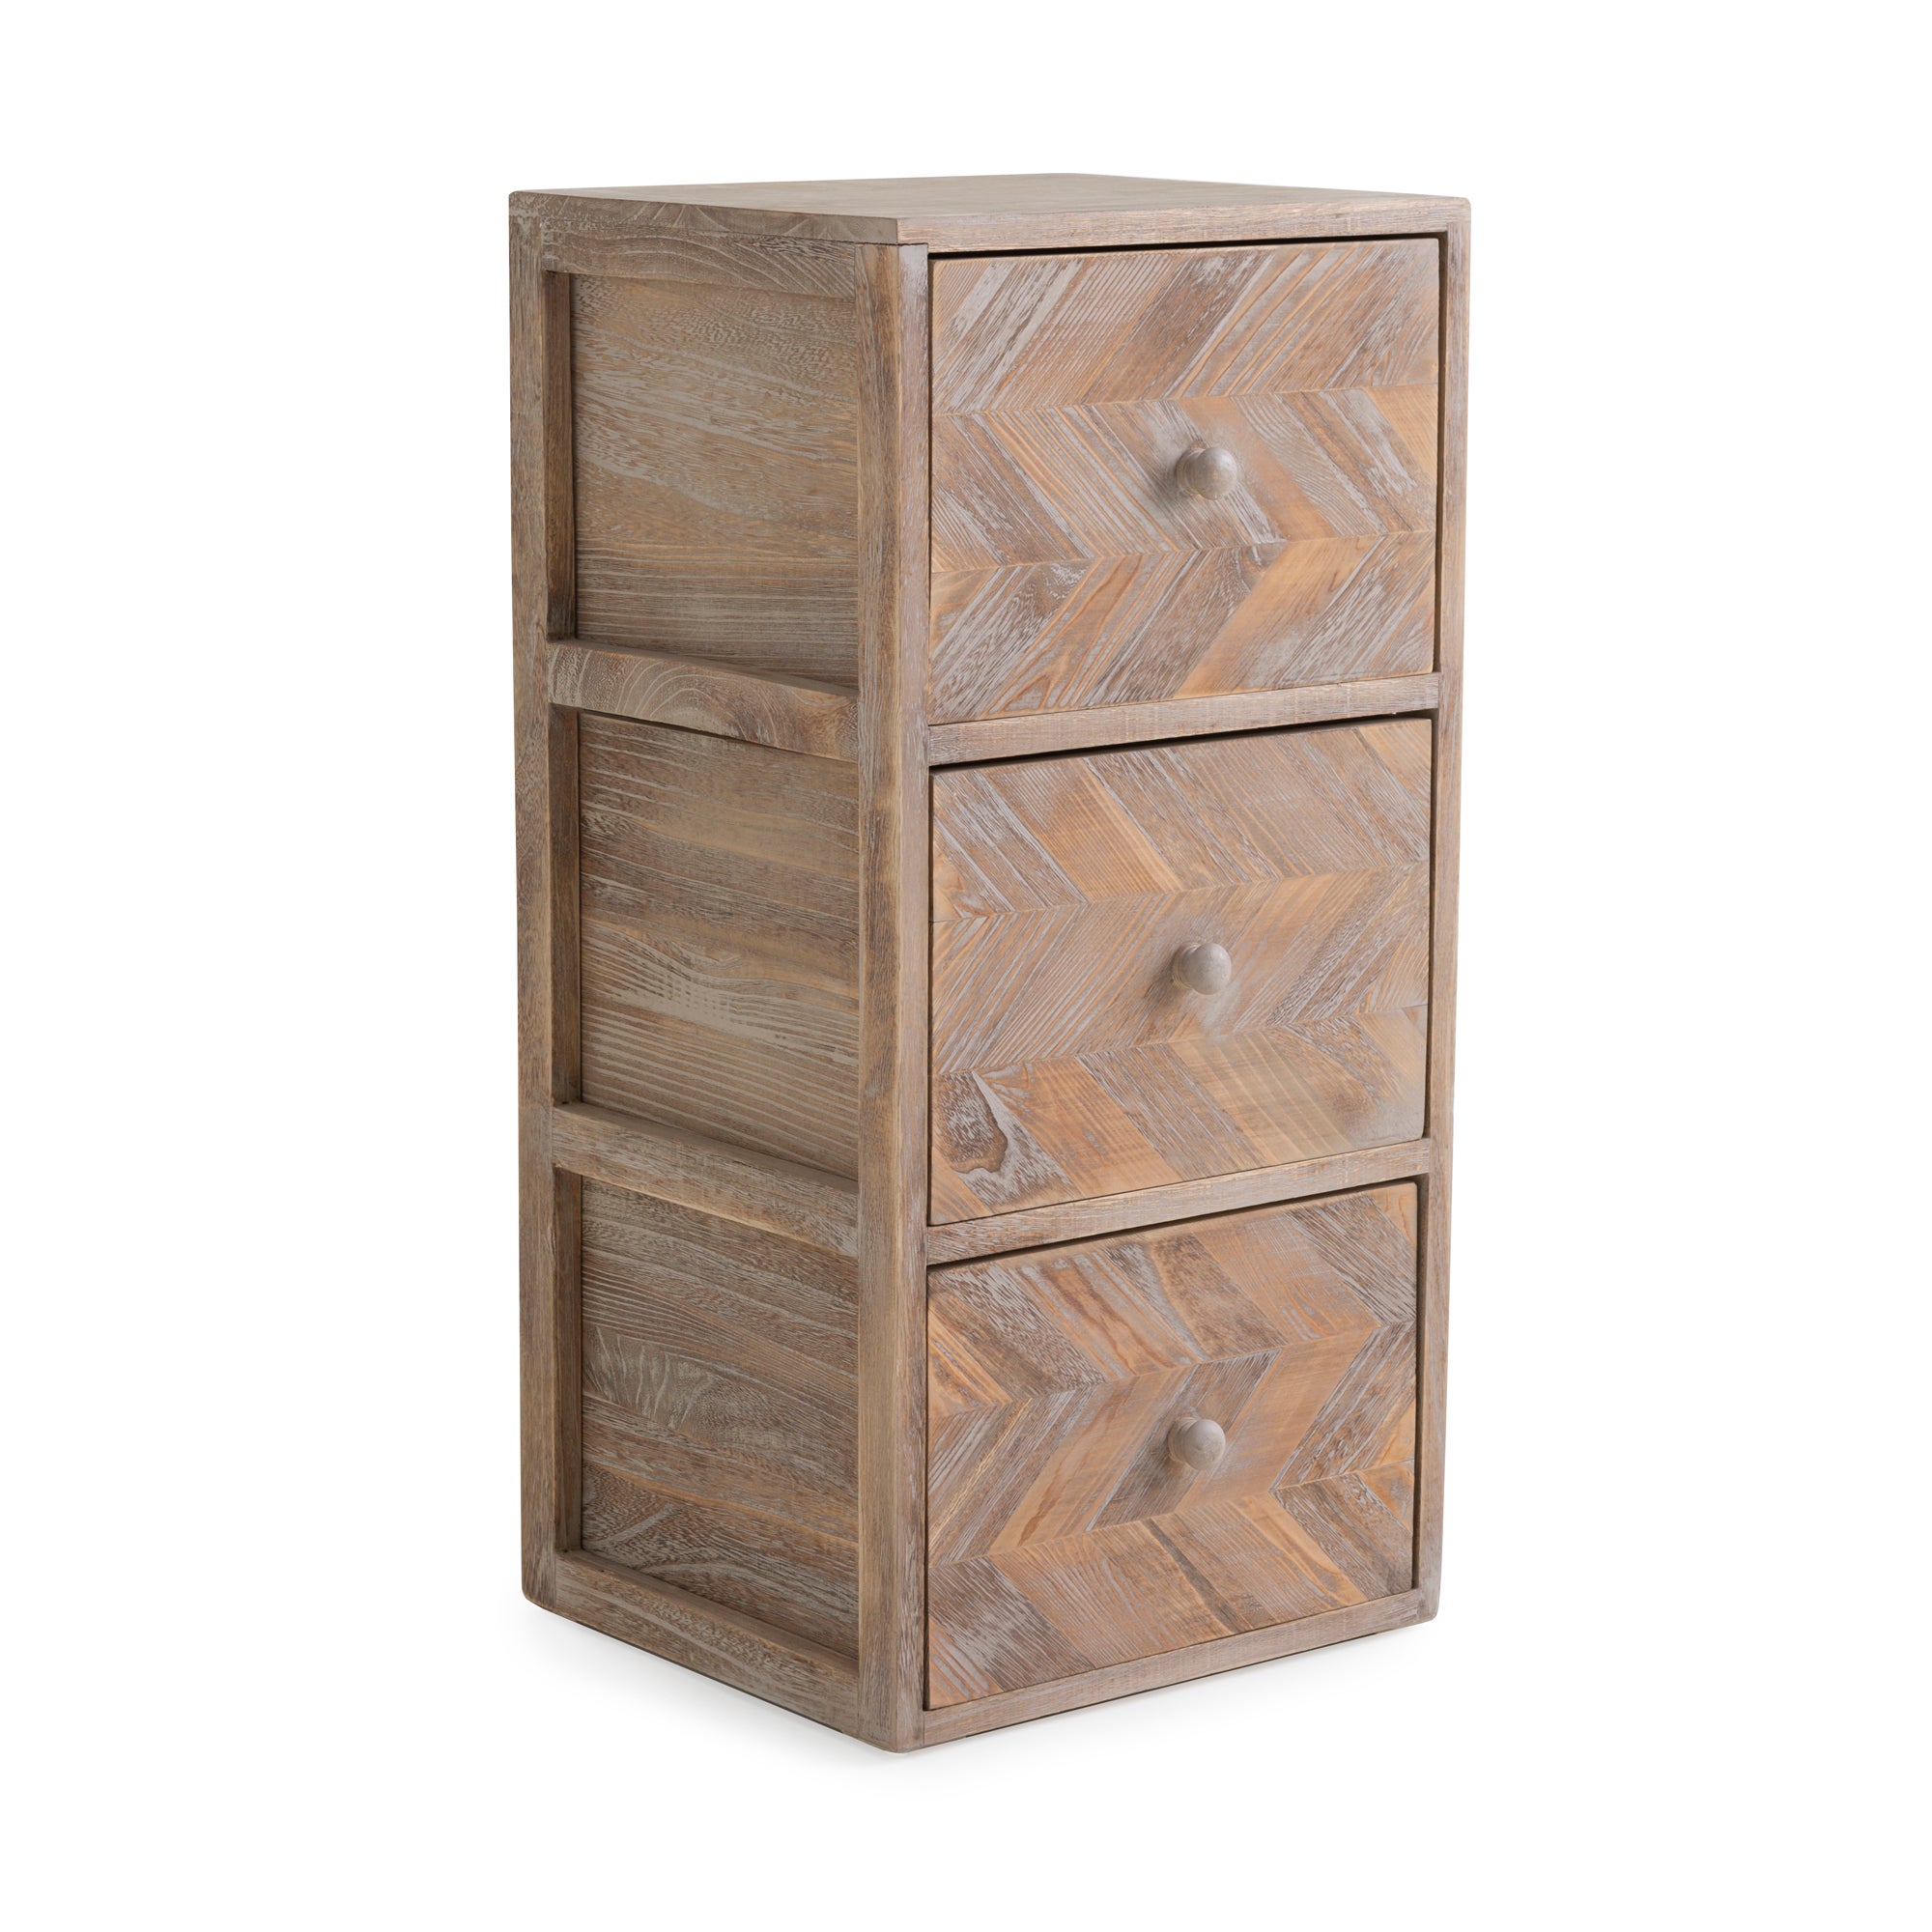 Wooden Storage Tower With Drawers / Storage Tower Chest Of Drawers With ...